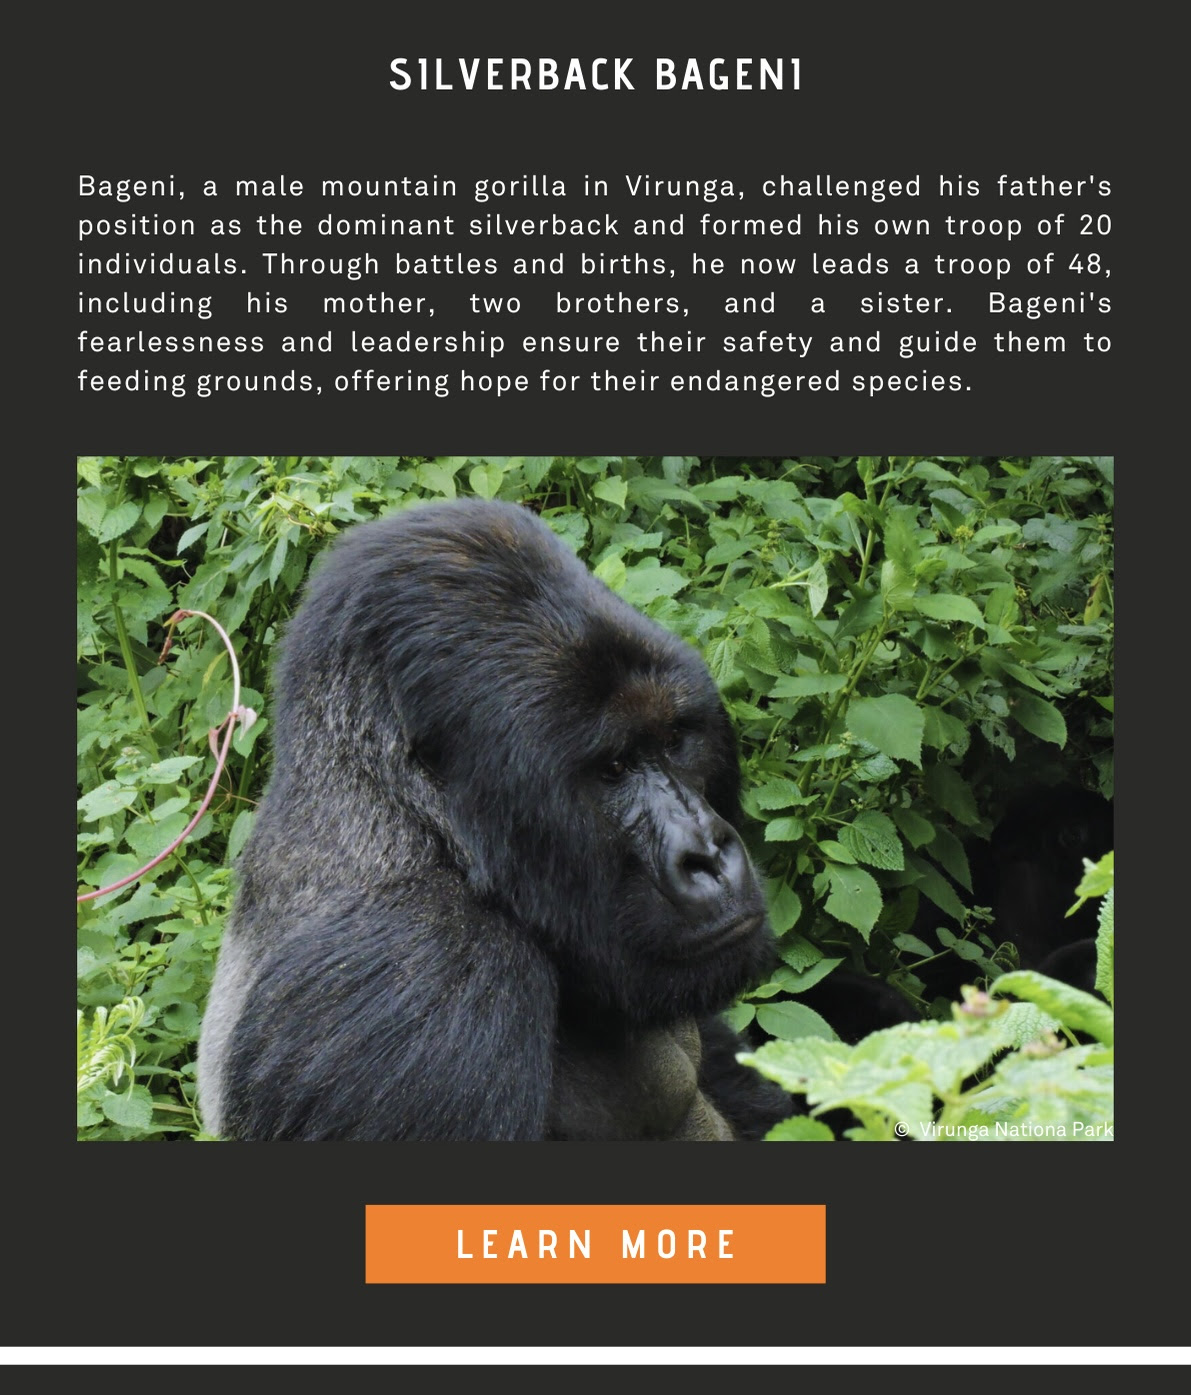 Bageni, a male mountain gorilla in Virunga, challenged his father's position as the dominant silverback and formed his own troop of 20 individuals.